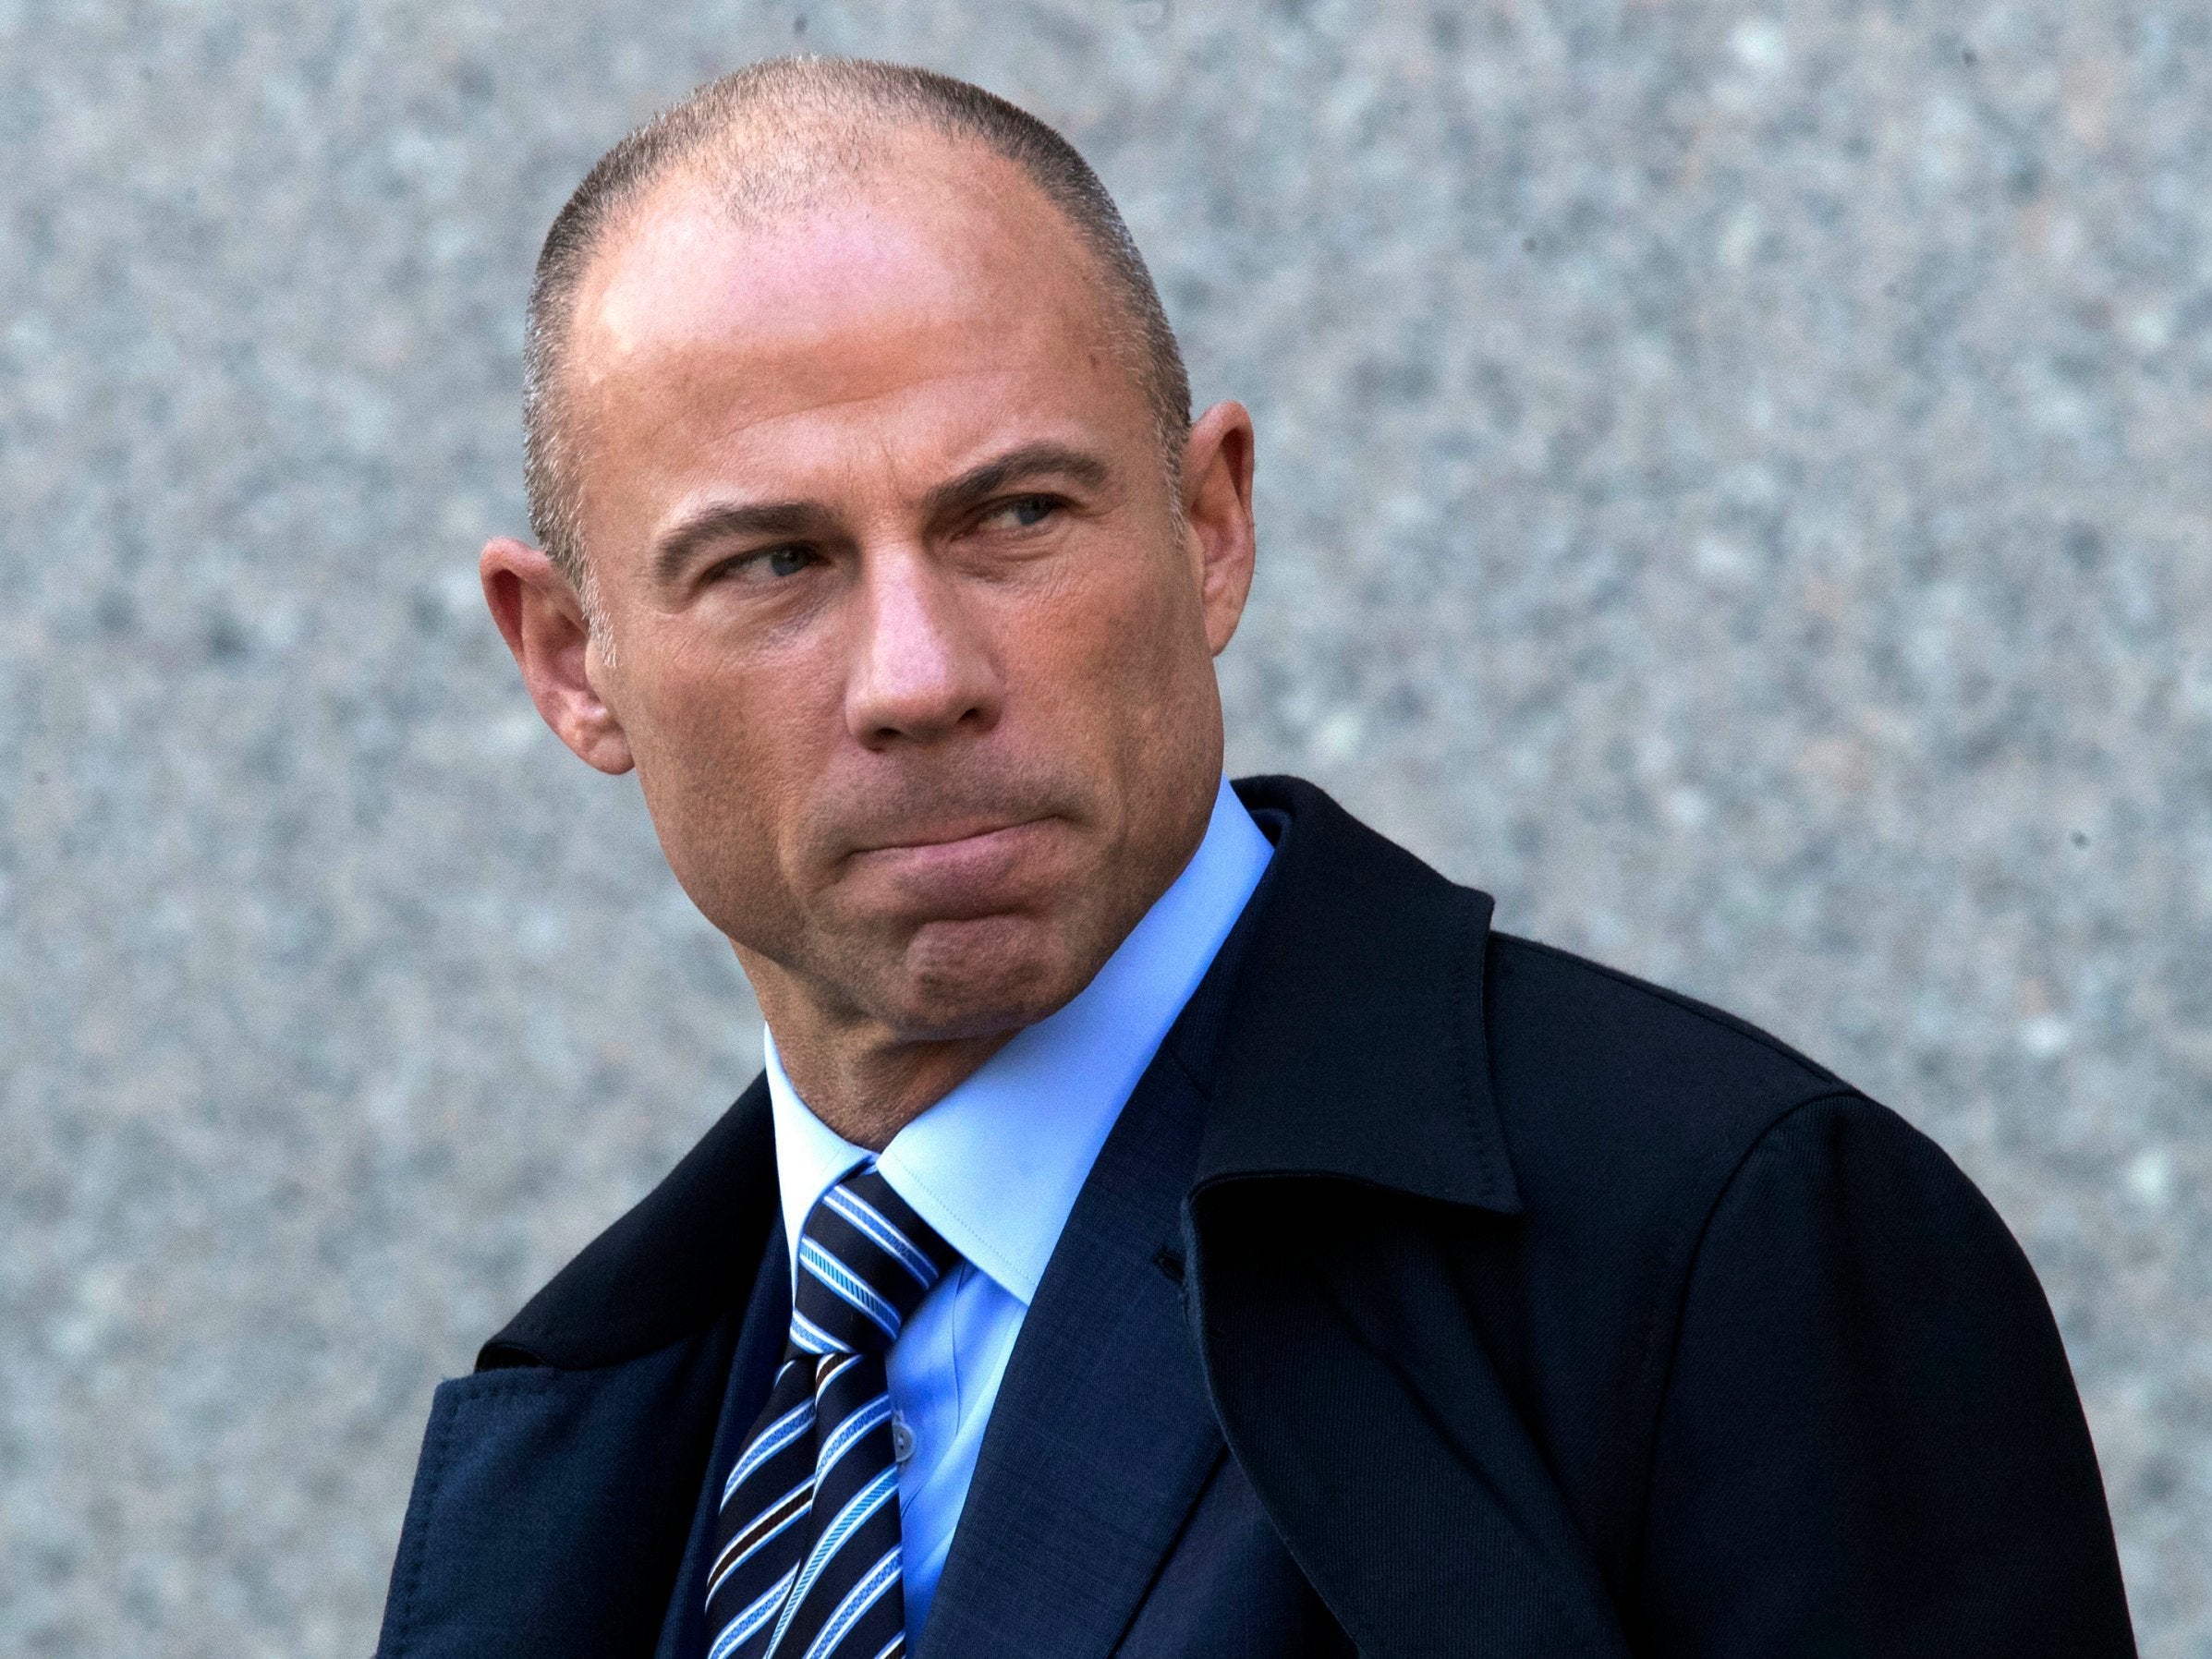 Michael Avenatti said at least one of the women claimed to be pregnant at the time they signed the agreement